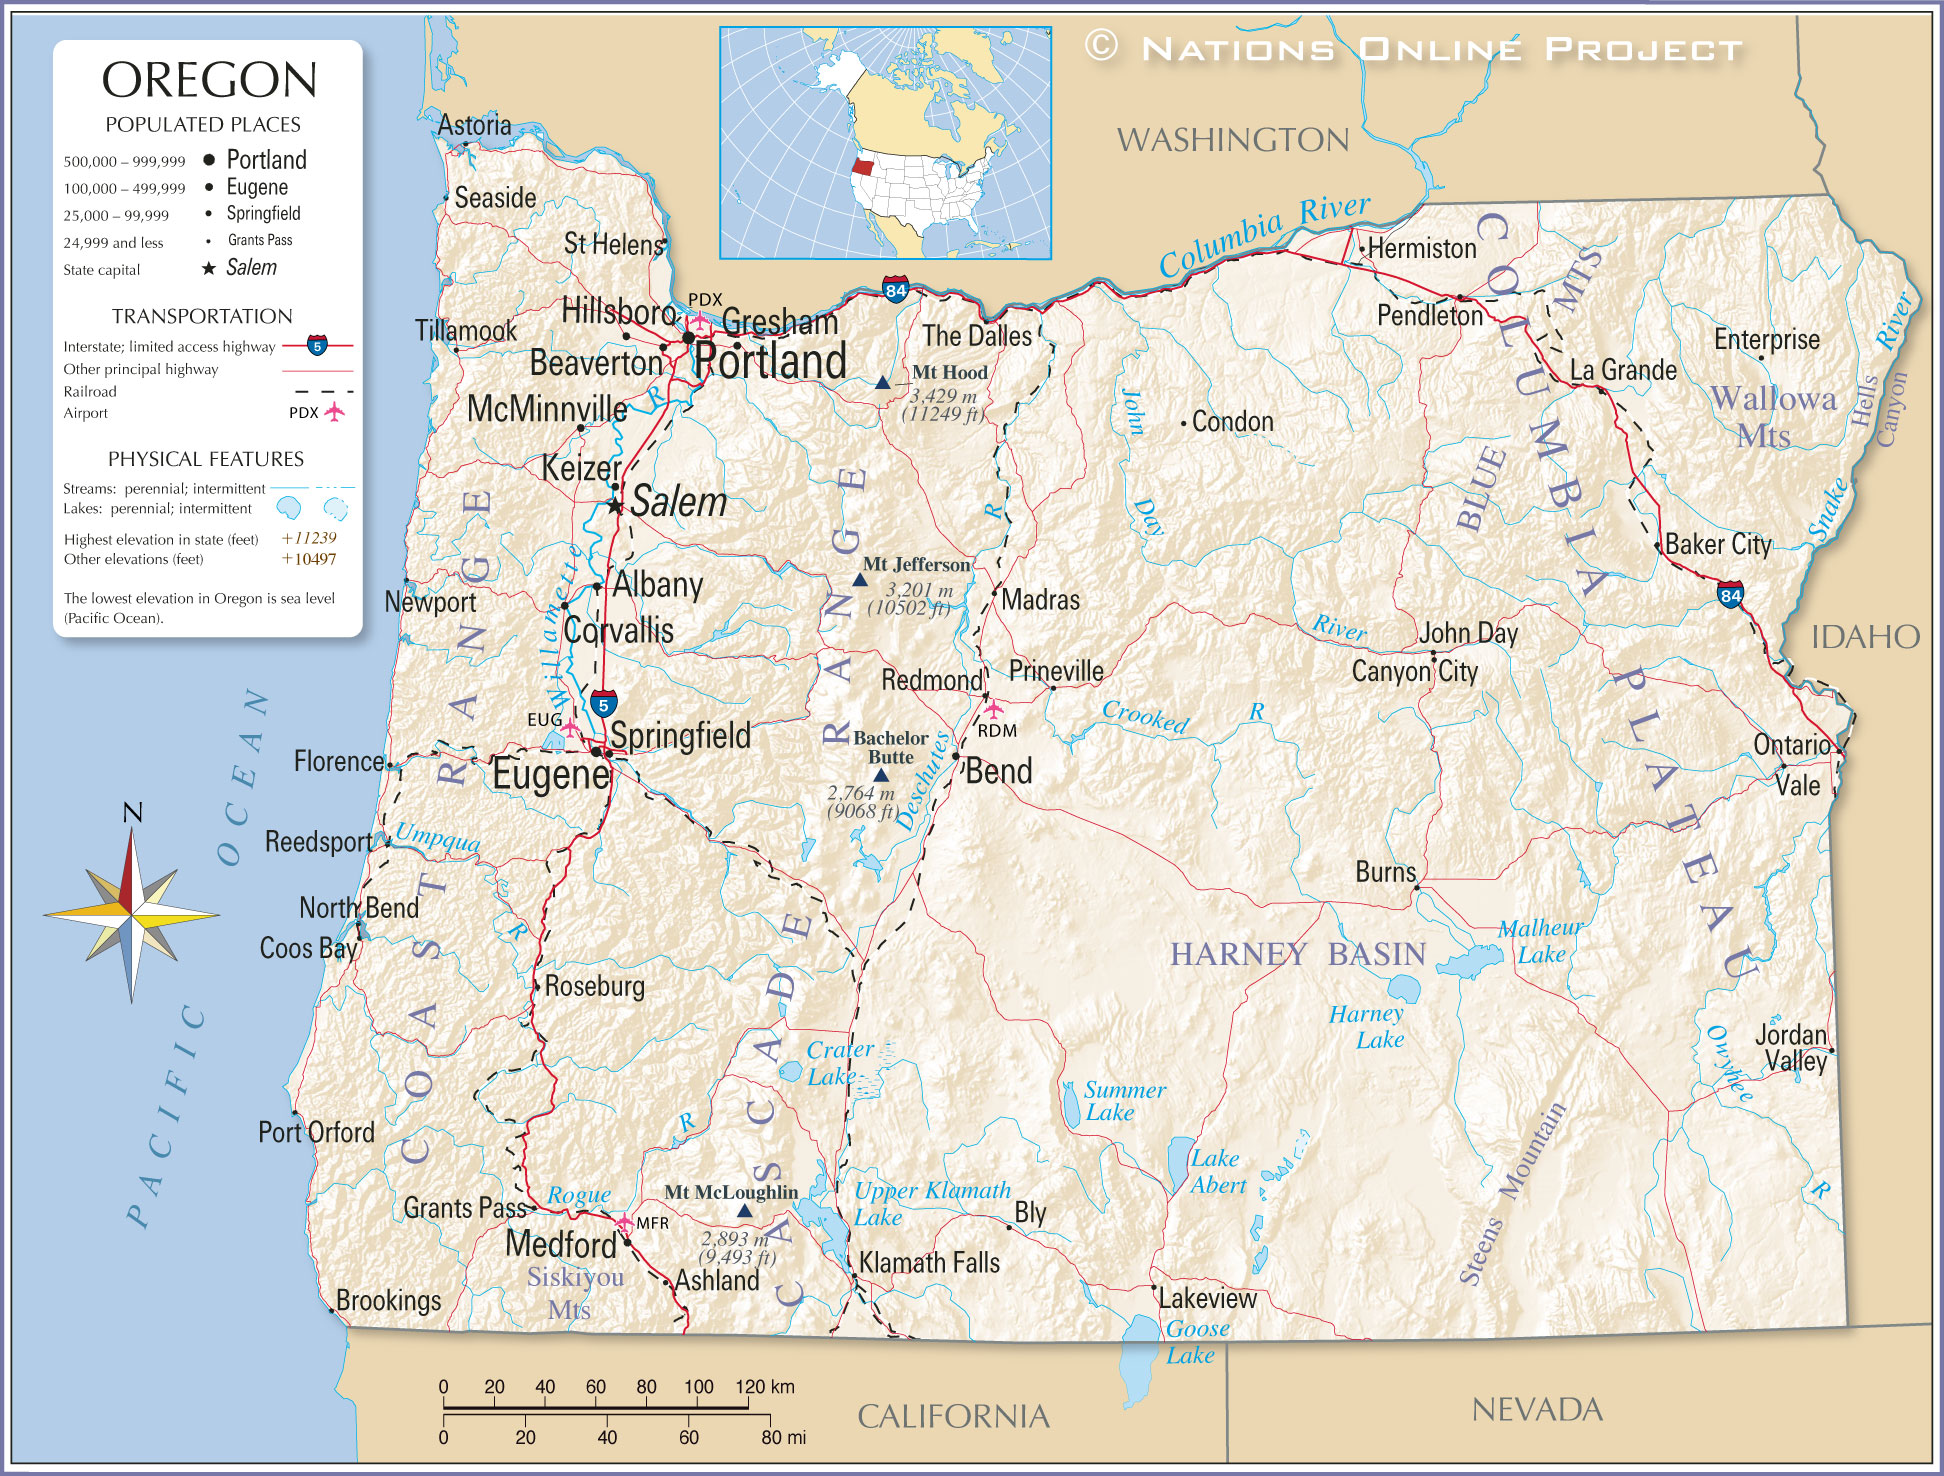 Map of the State of Oregon, USA - Nations Online Project